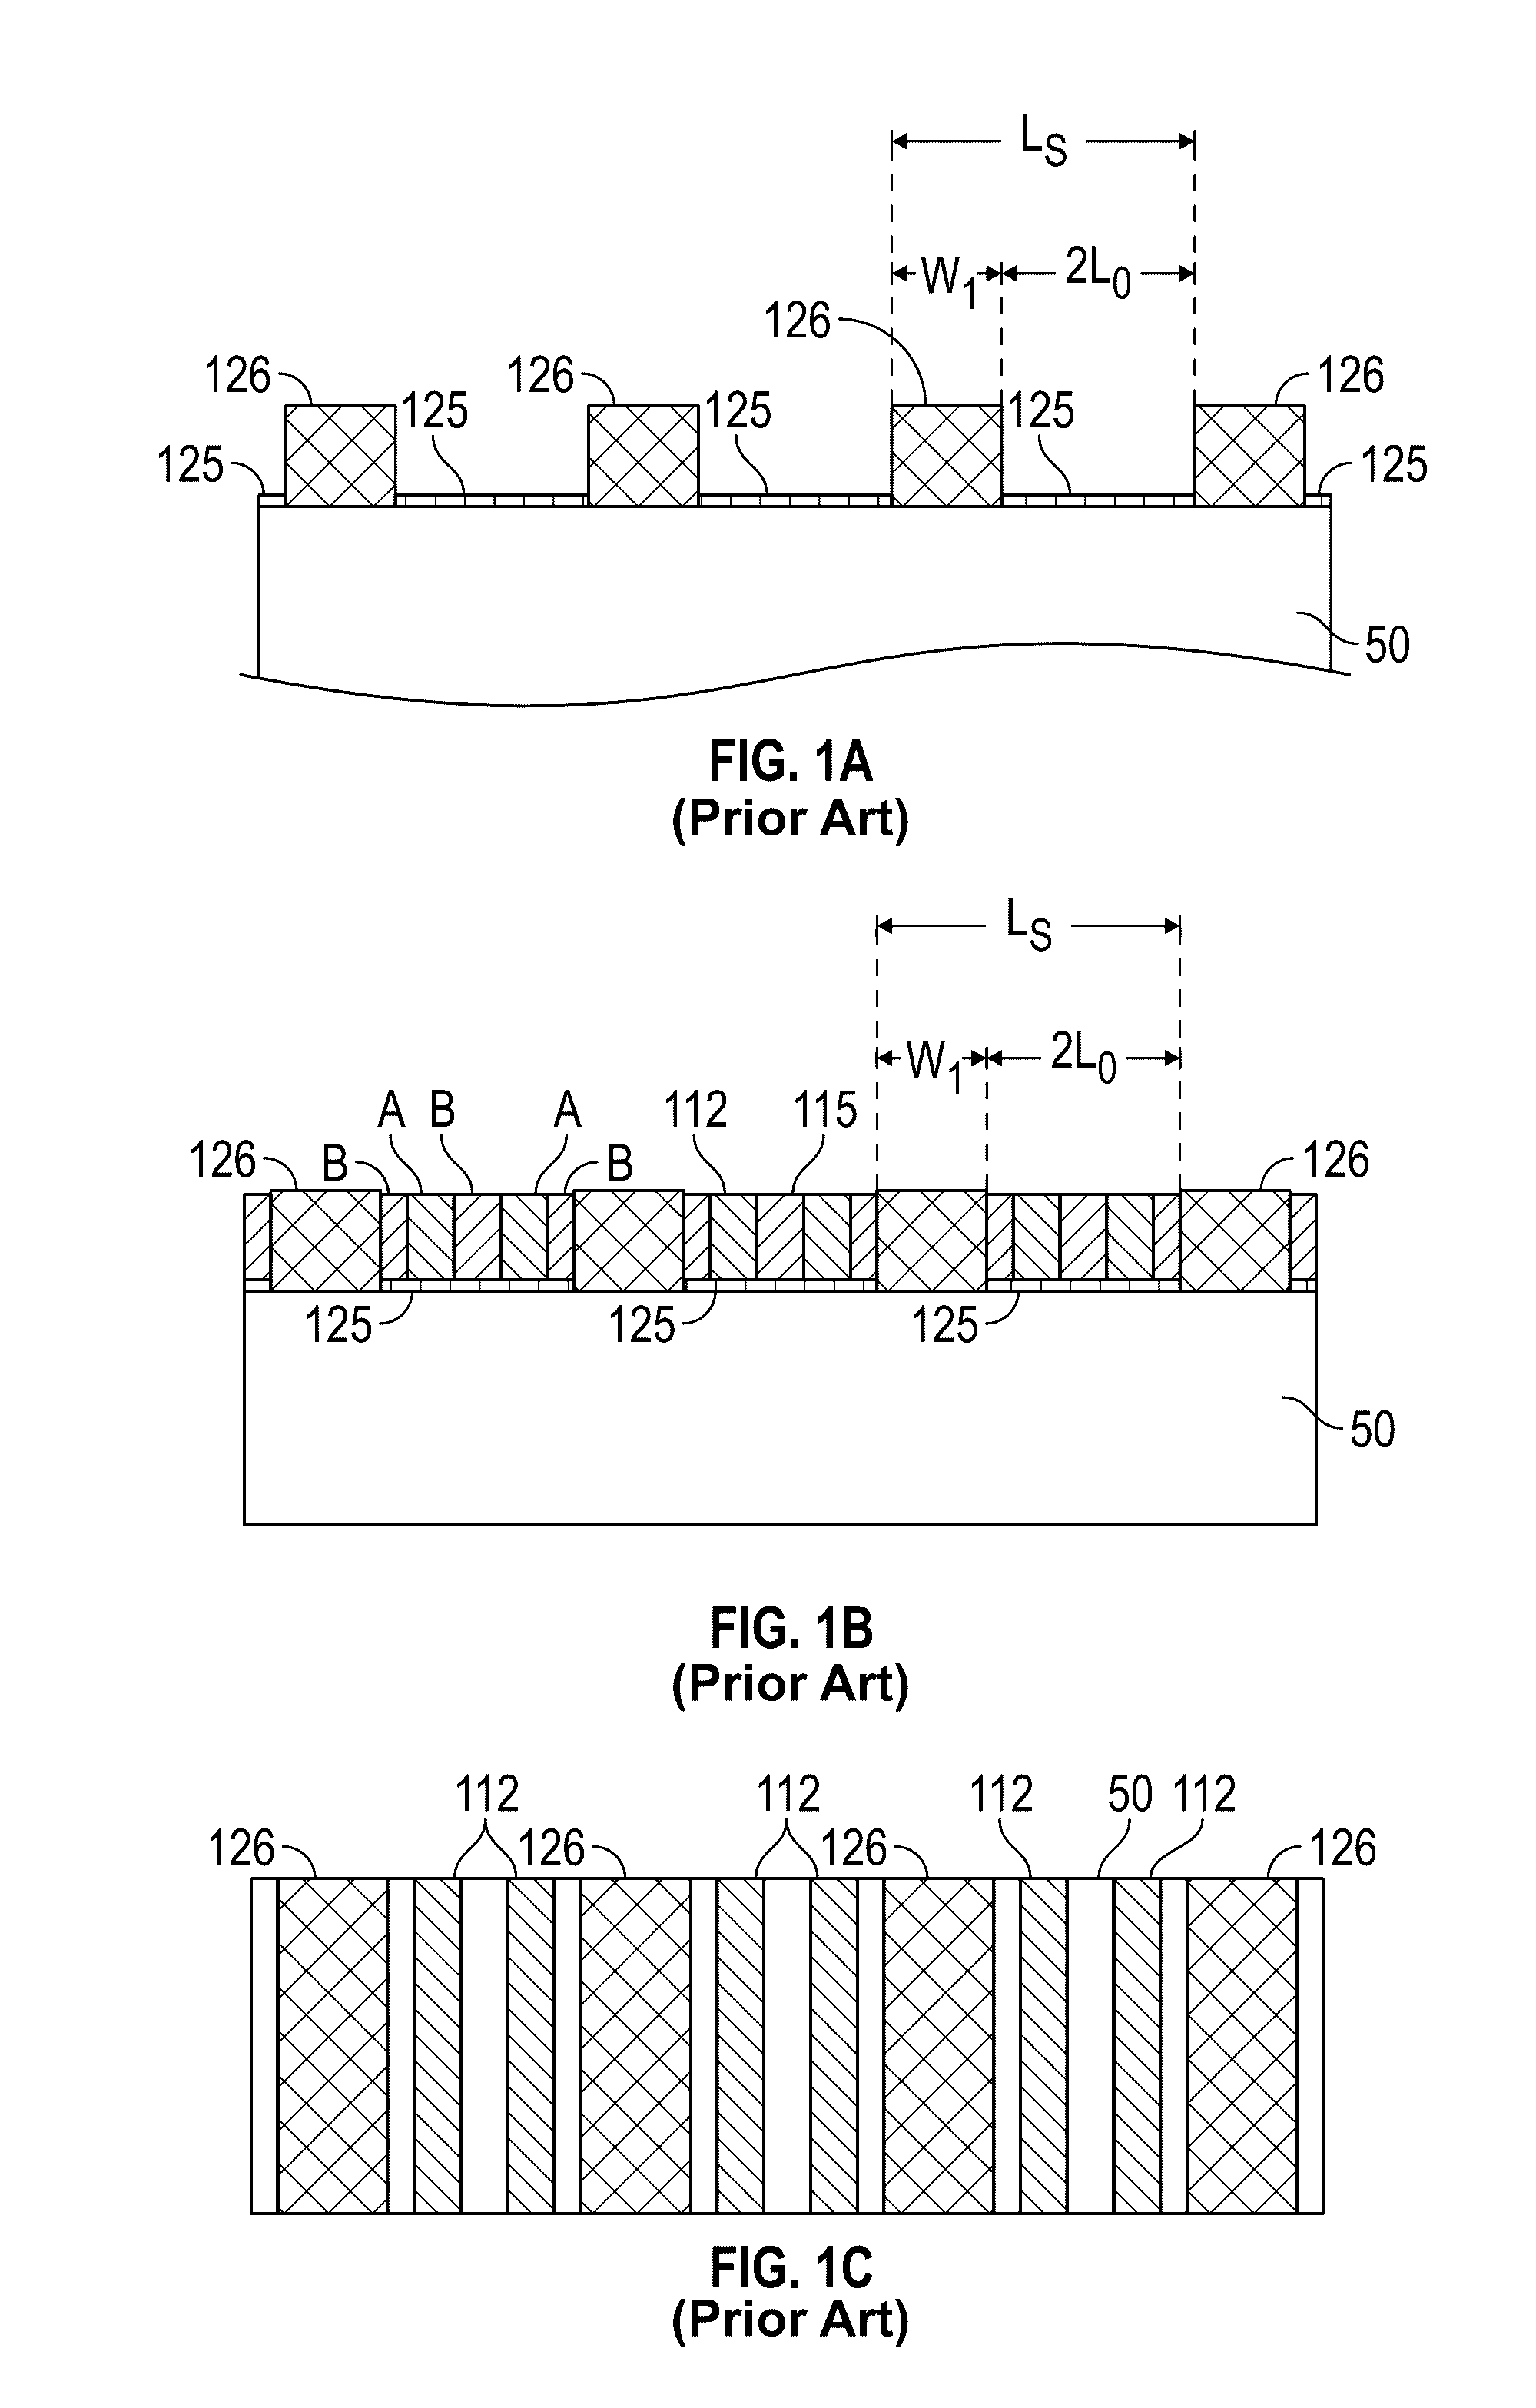 Method for directed self-assembly (DSA) of a block copolymer (BCP) using a topographic pattern